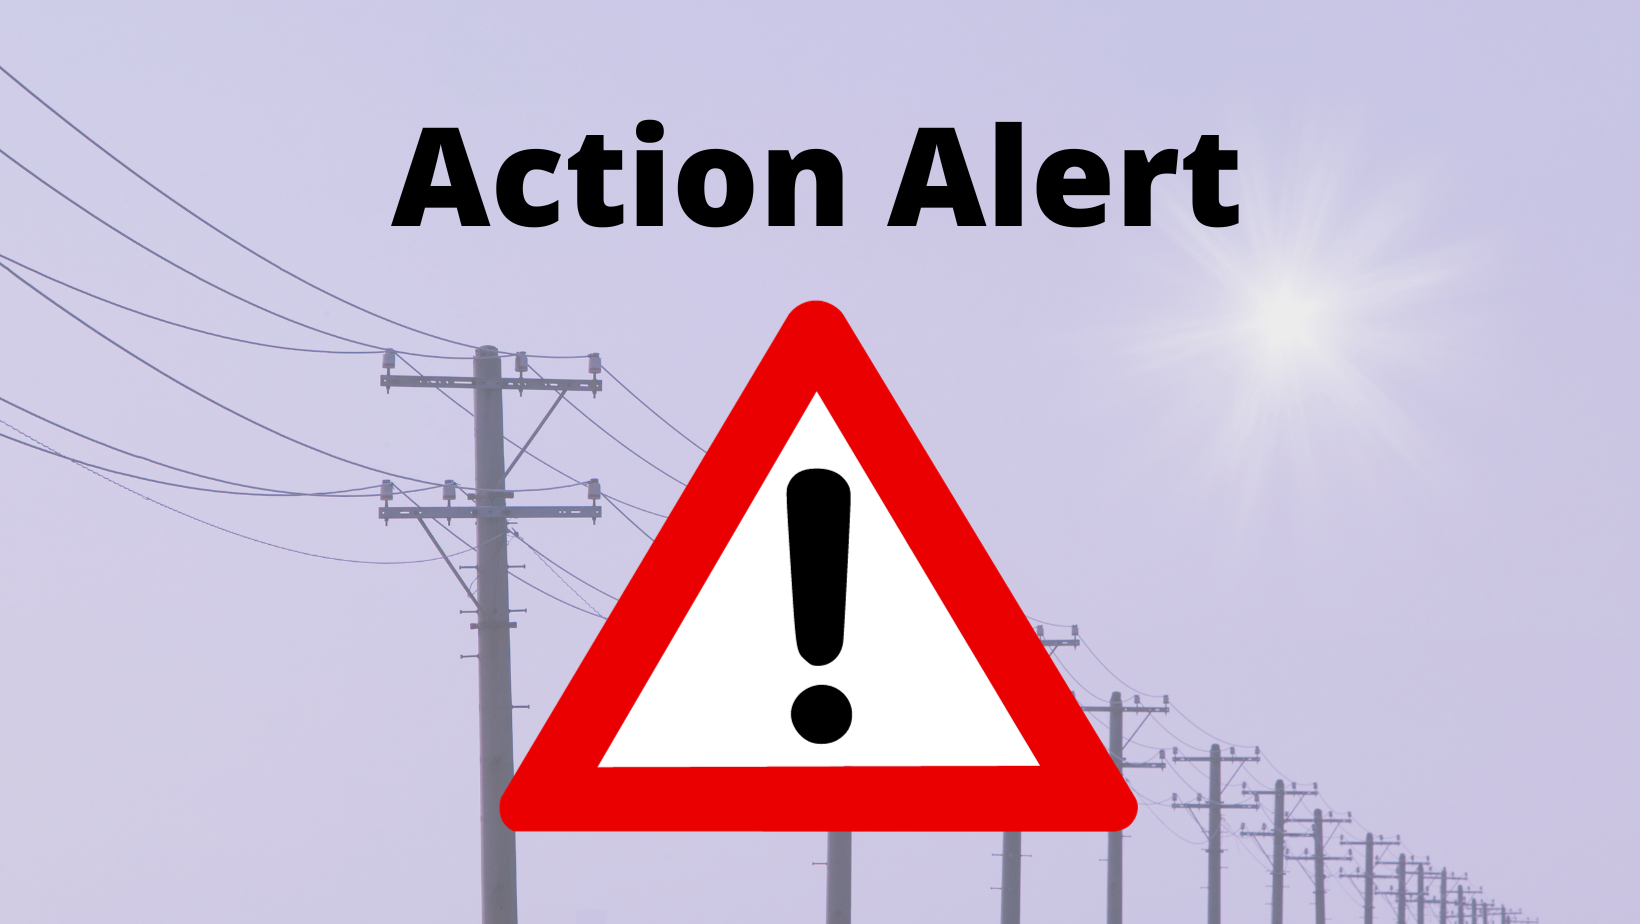 Action Alert text with black exclamation point in red and white triangle graphic 